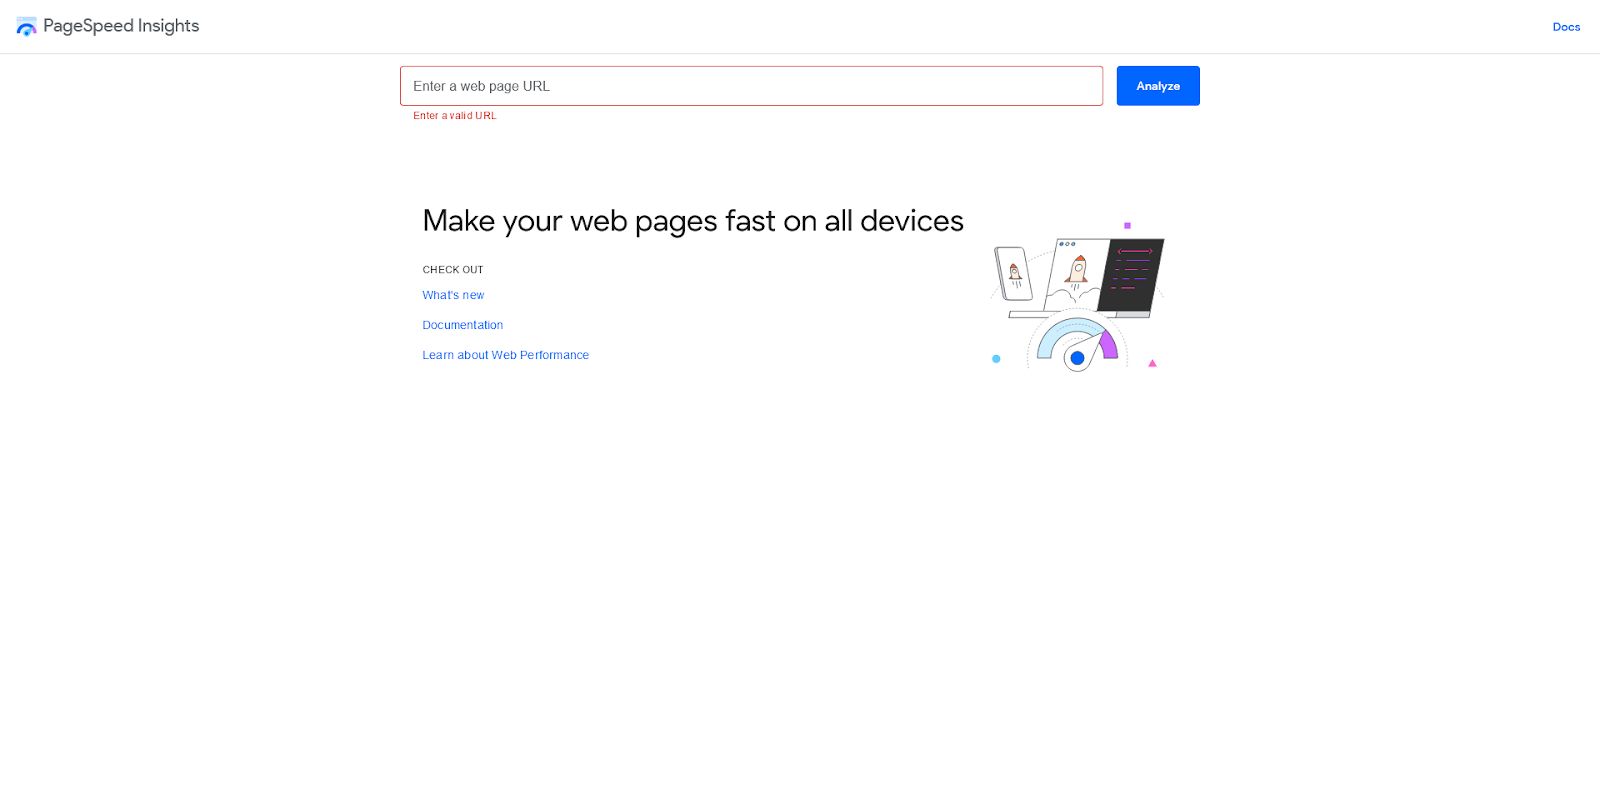 The homepage for Google PageSpeed Insights prompts you to enter a URL.